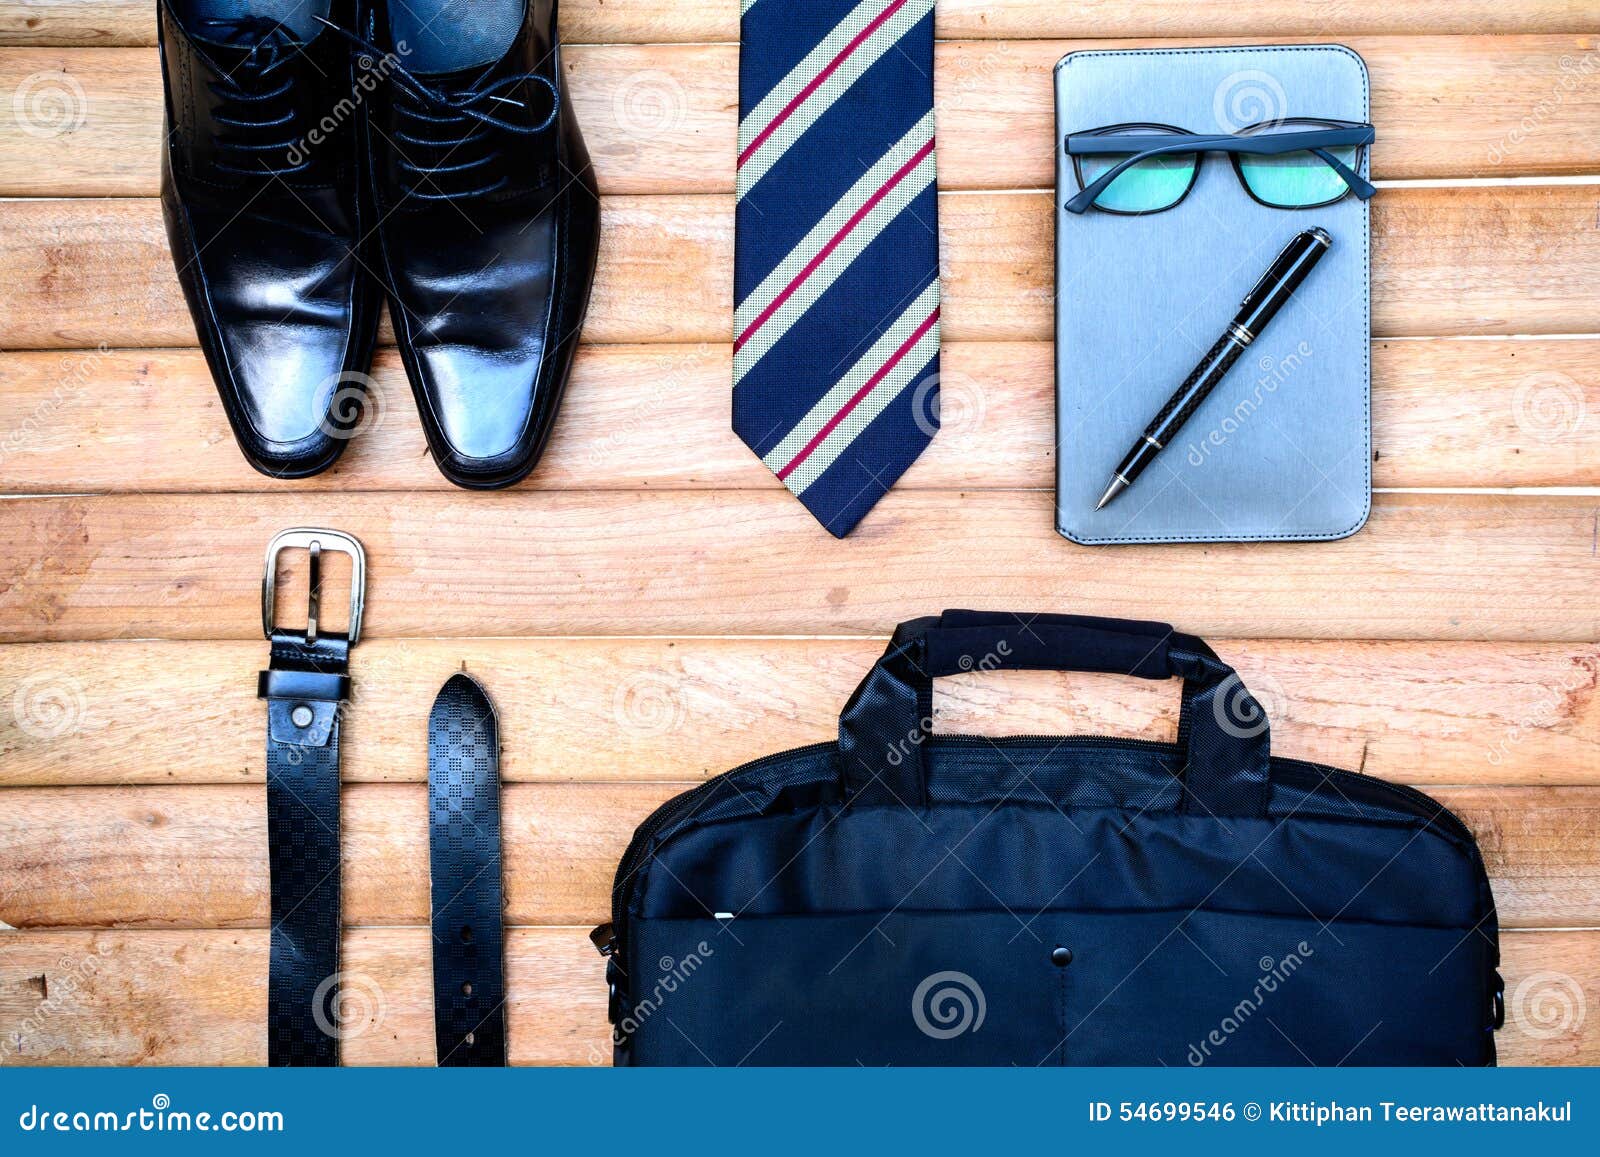 Men Accessories on Old Wooden, Business Themes Stock Photo - Image of ...